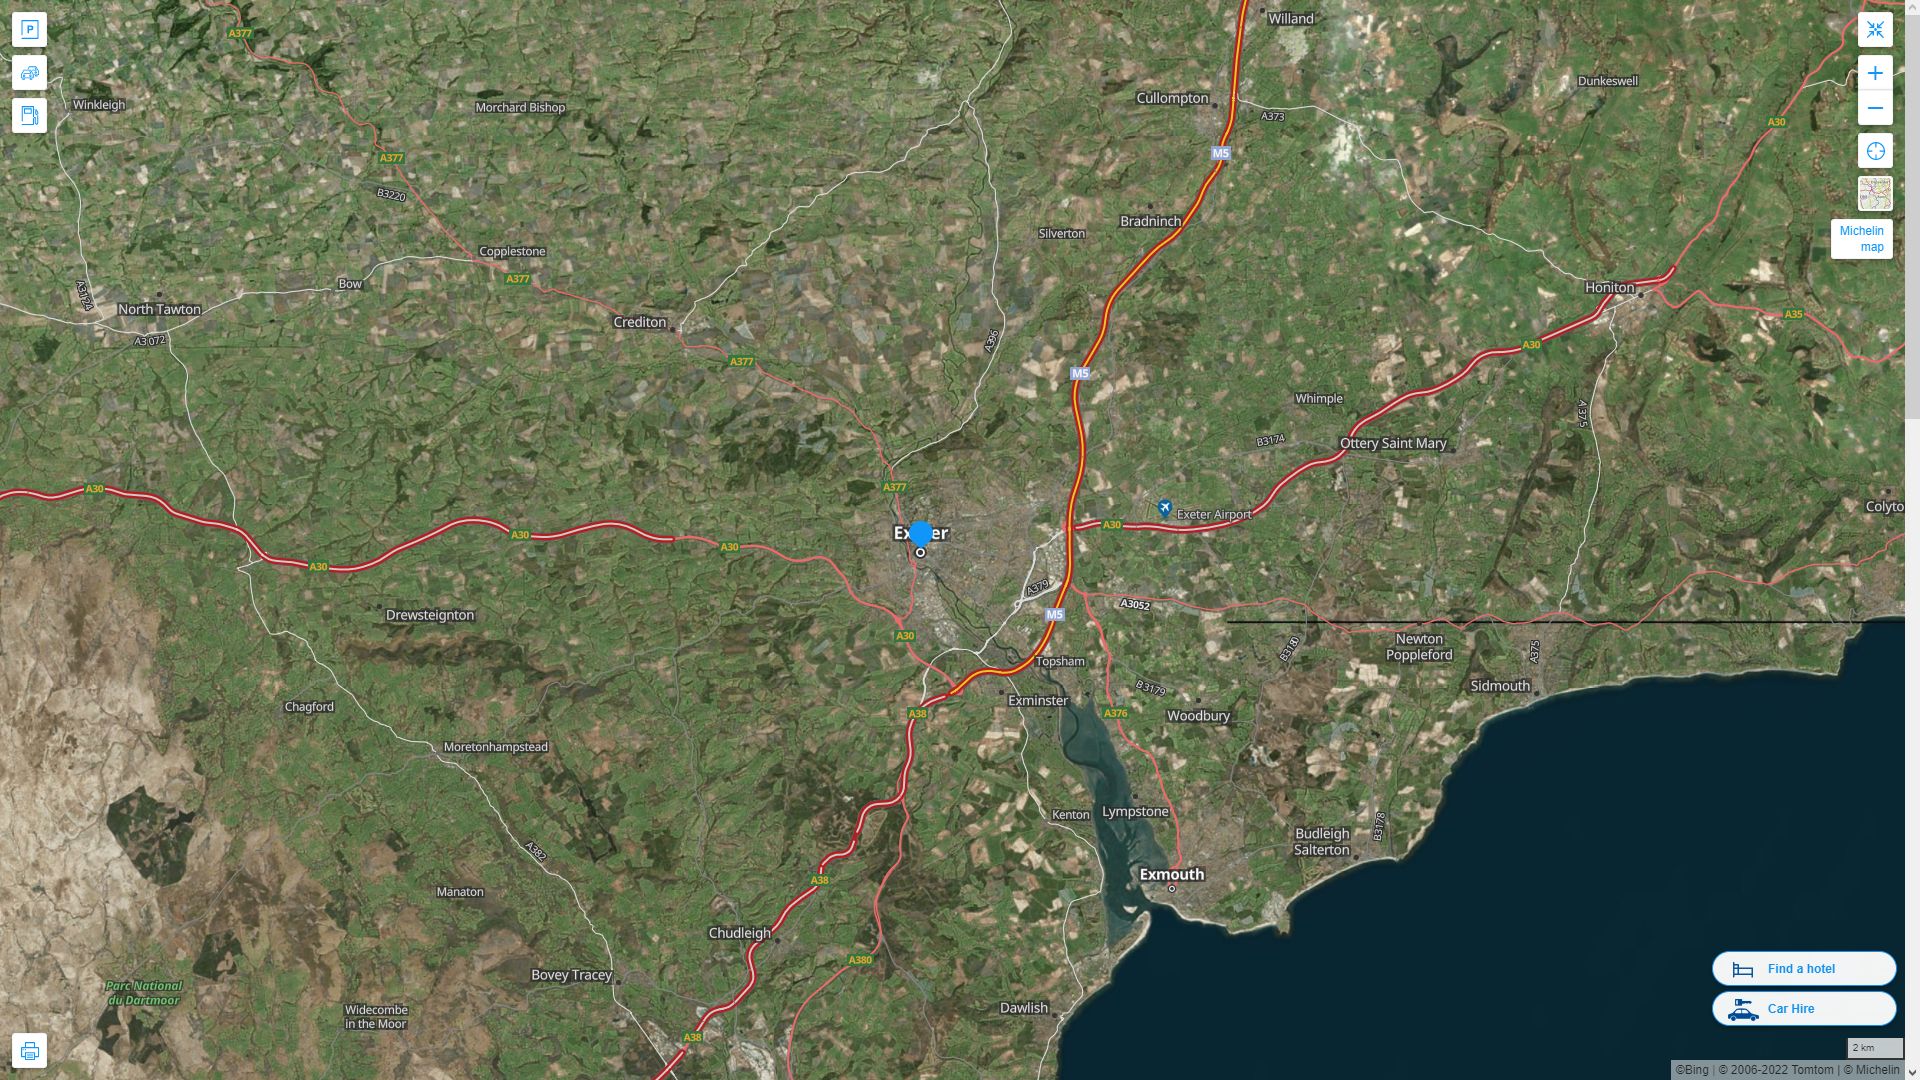 Exeter Highway and Road Map with Satellite View